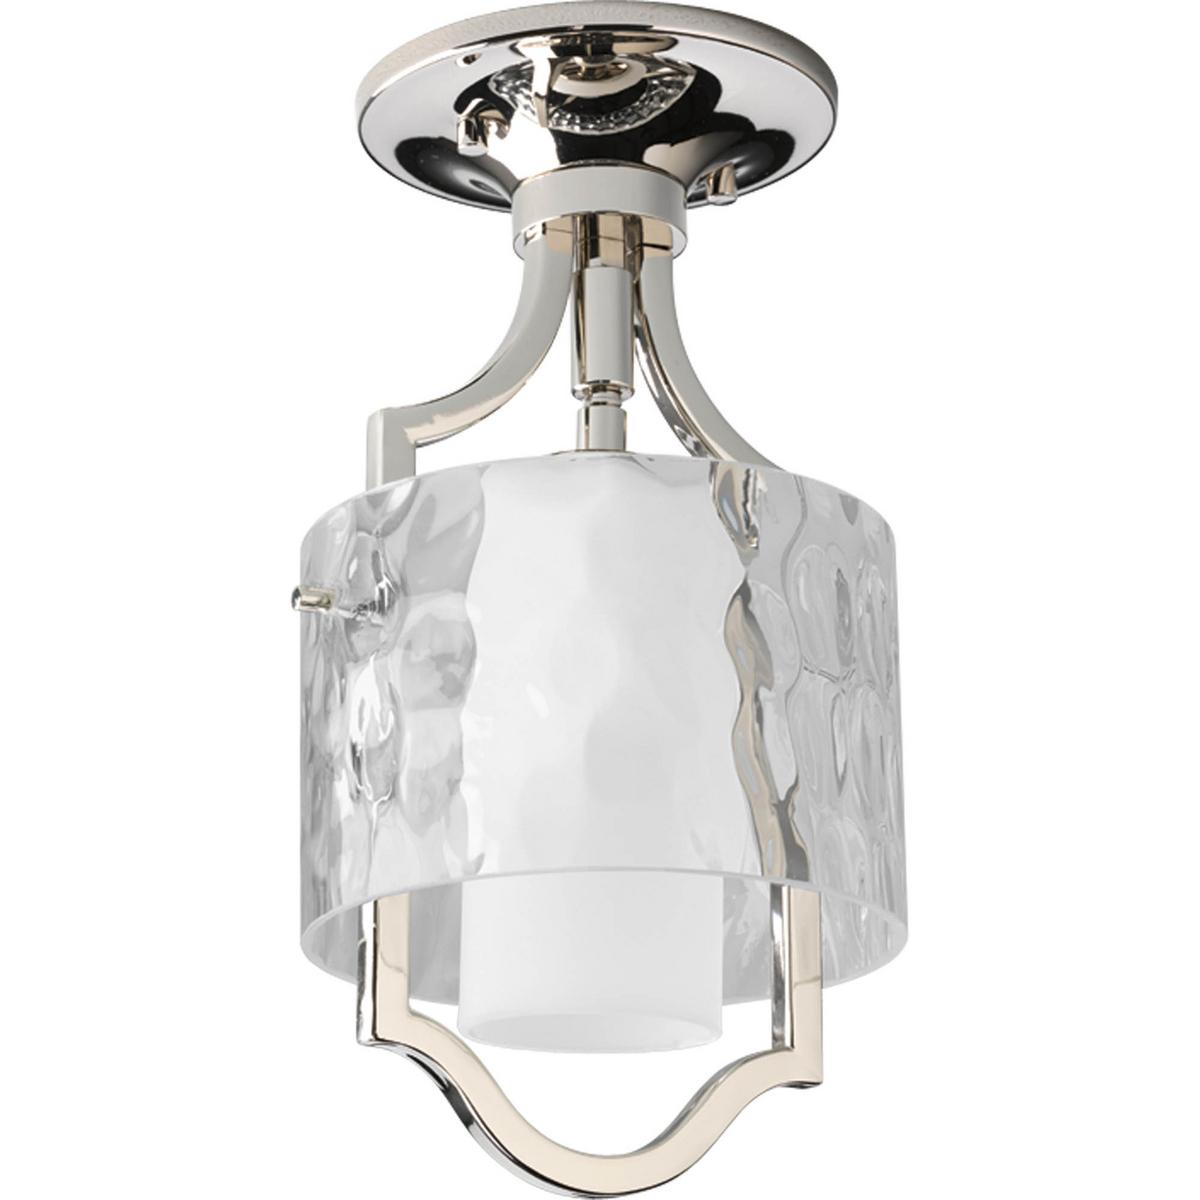 Hubbell P5044-104WB One-light pendant/semi-flush convertible fixture with bulb. Caress features a chic, sophisticated one-light semi-flush featuring a Polished Nickel metal frame with layered glass diffusers to cast a glimmering light. An outer shade of clear, water glass ad